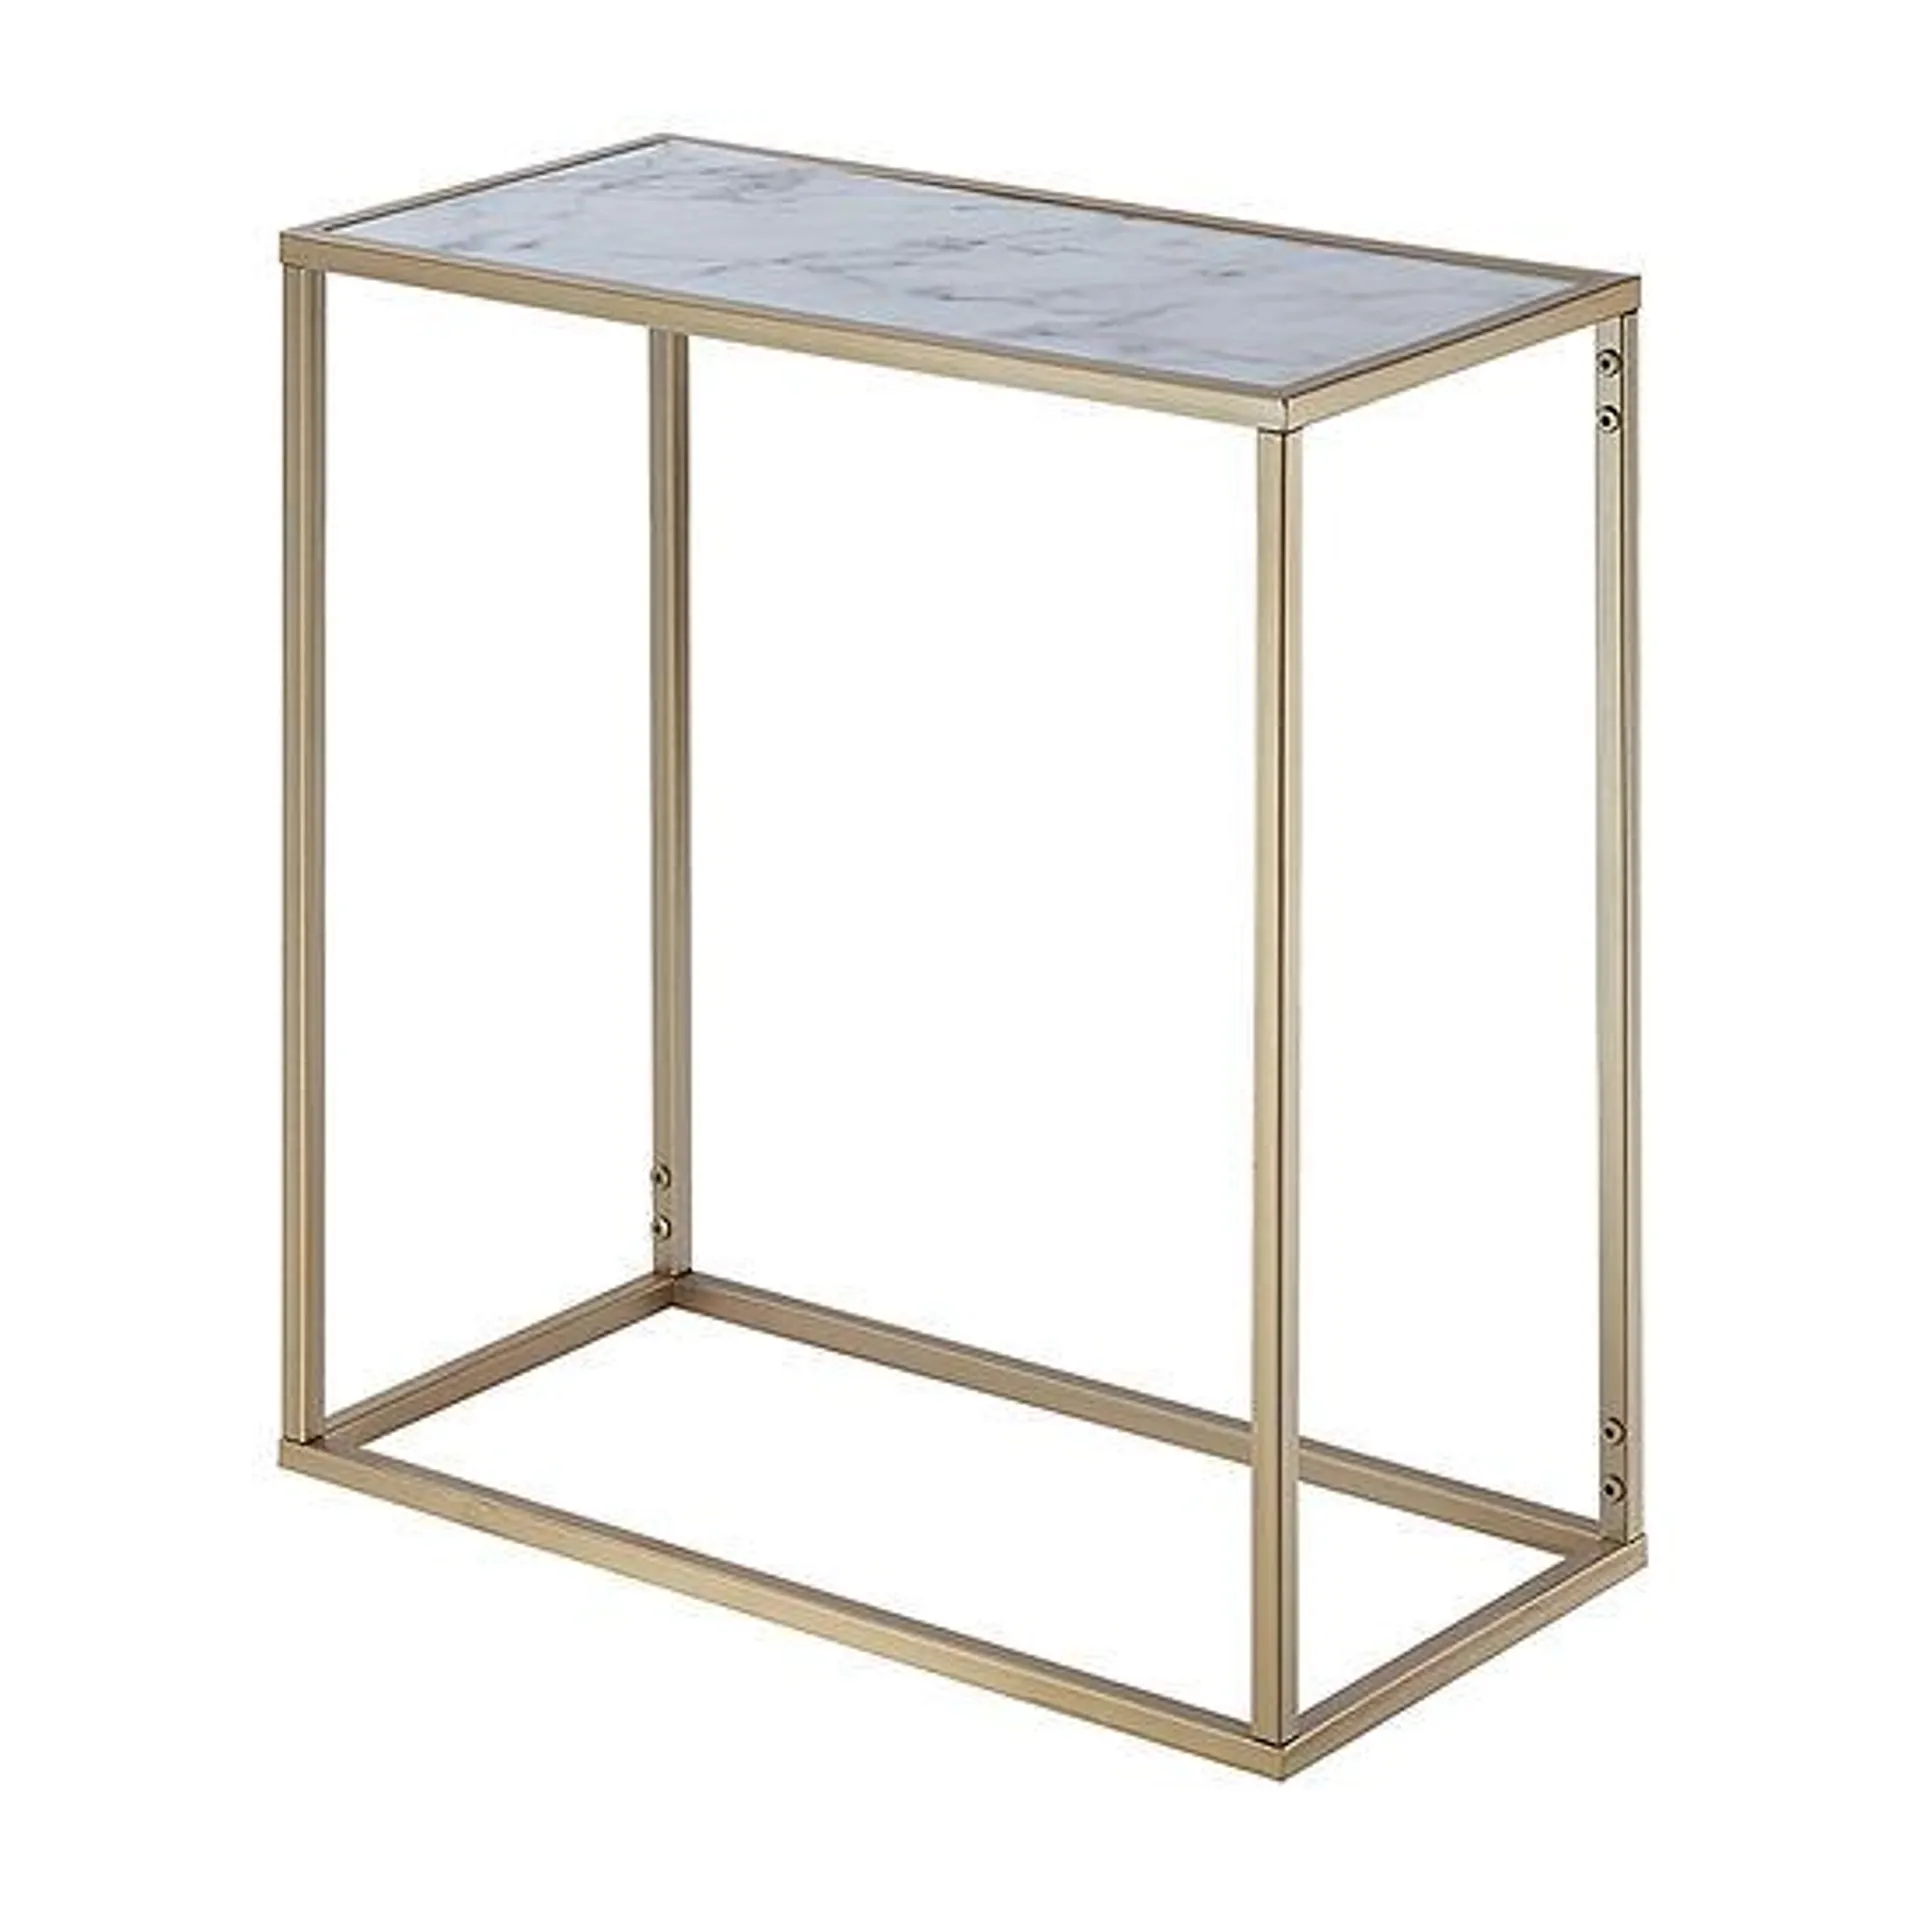 Gold Coast Living Room Collection Chairside Table